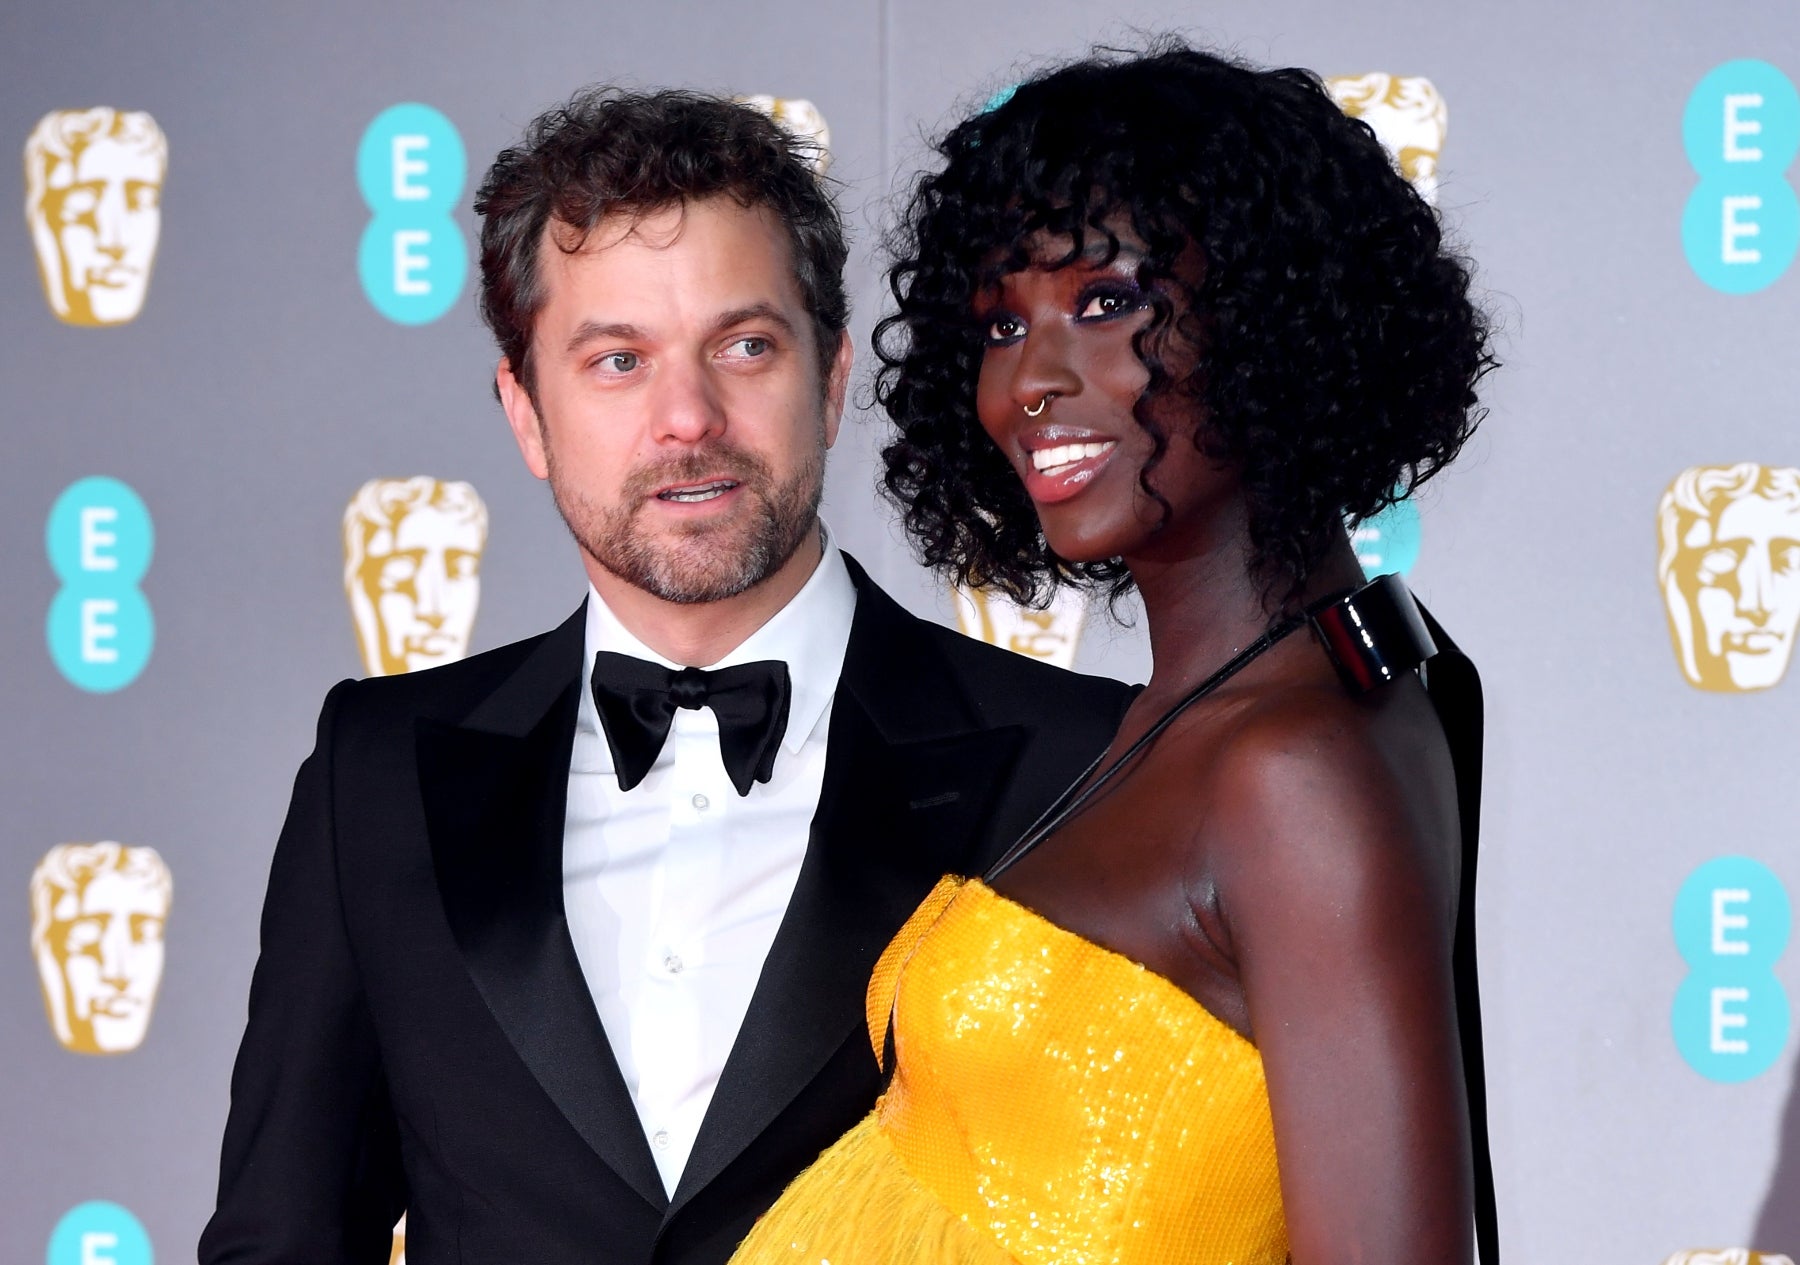 Find A Man Who Publicly Celebrates You The Way Joshua Jackson Does Wife Jodie Turner-Smith